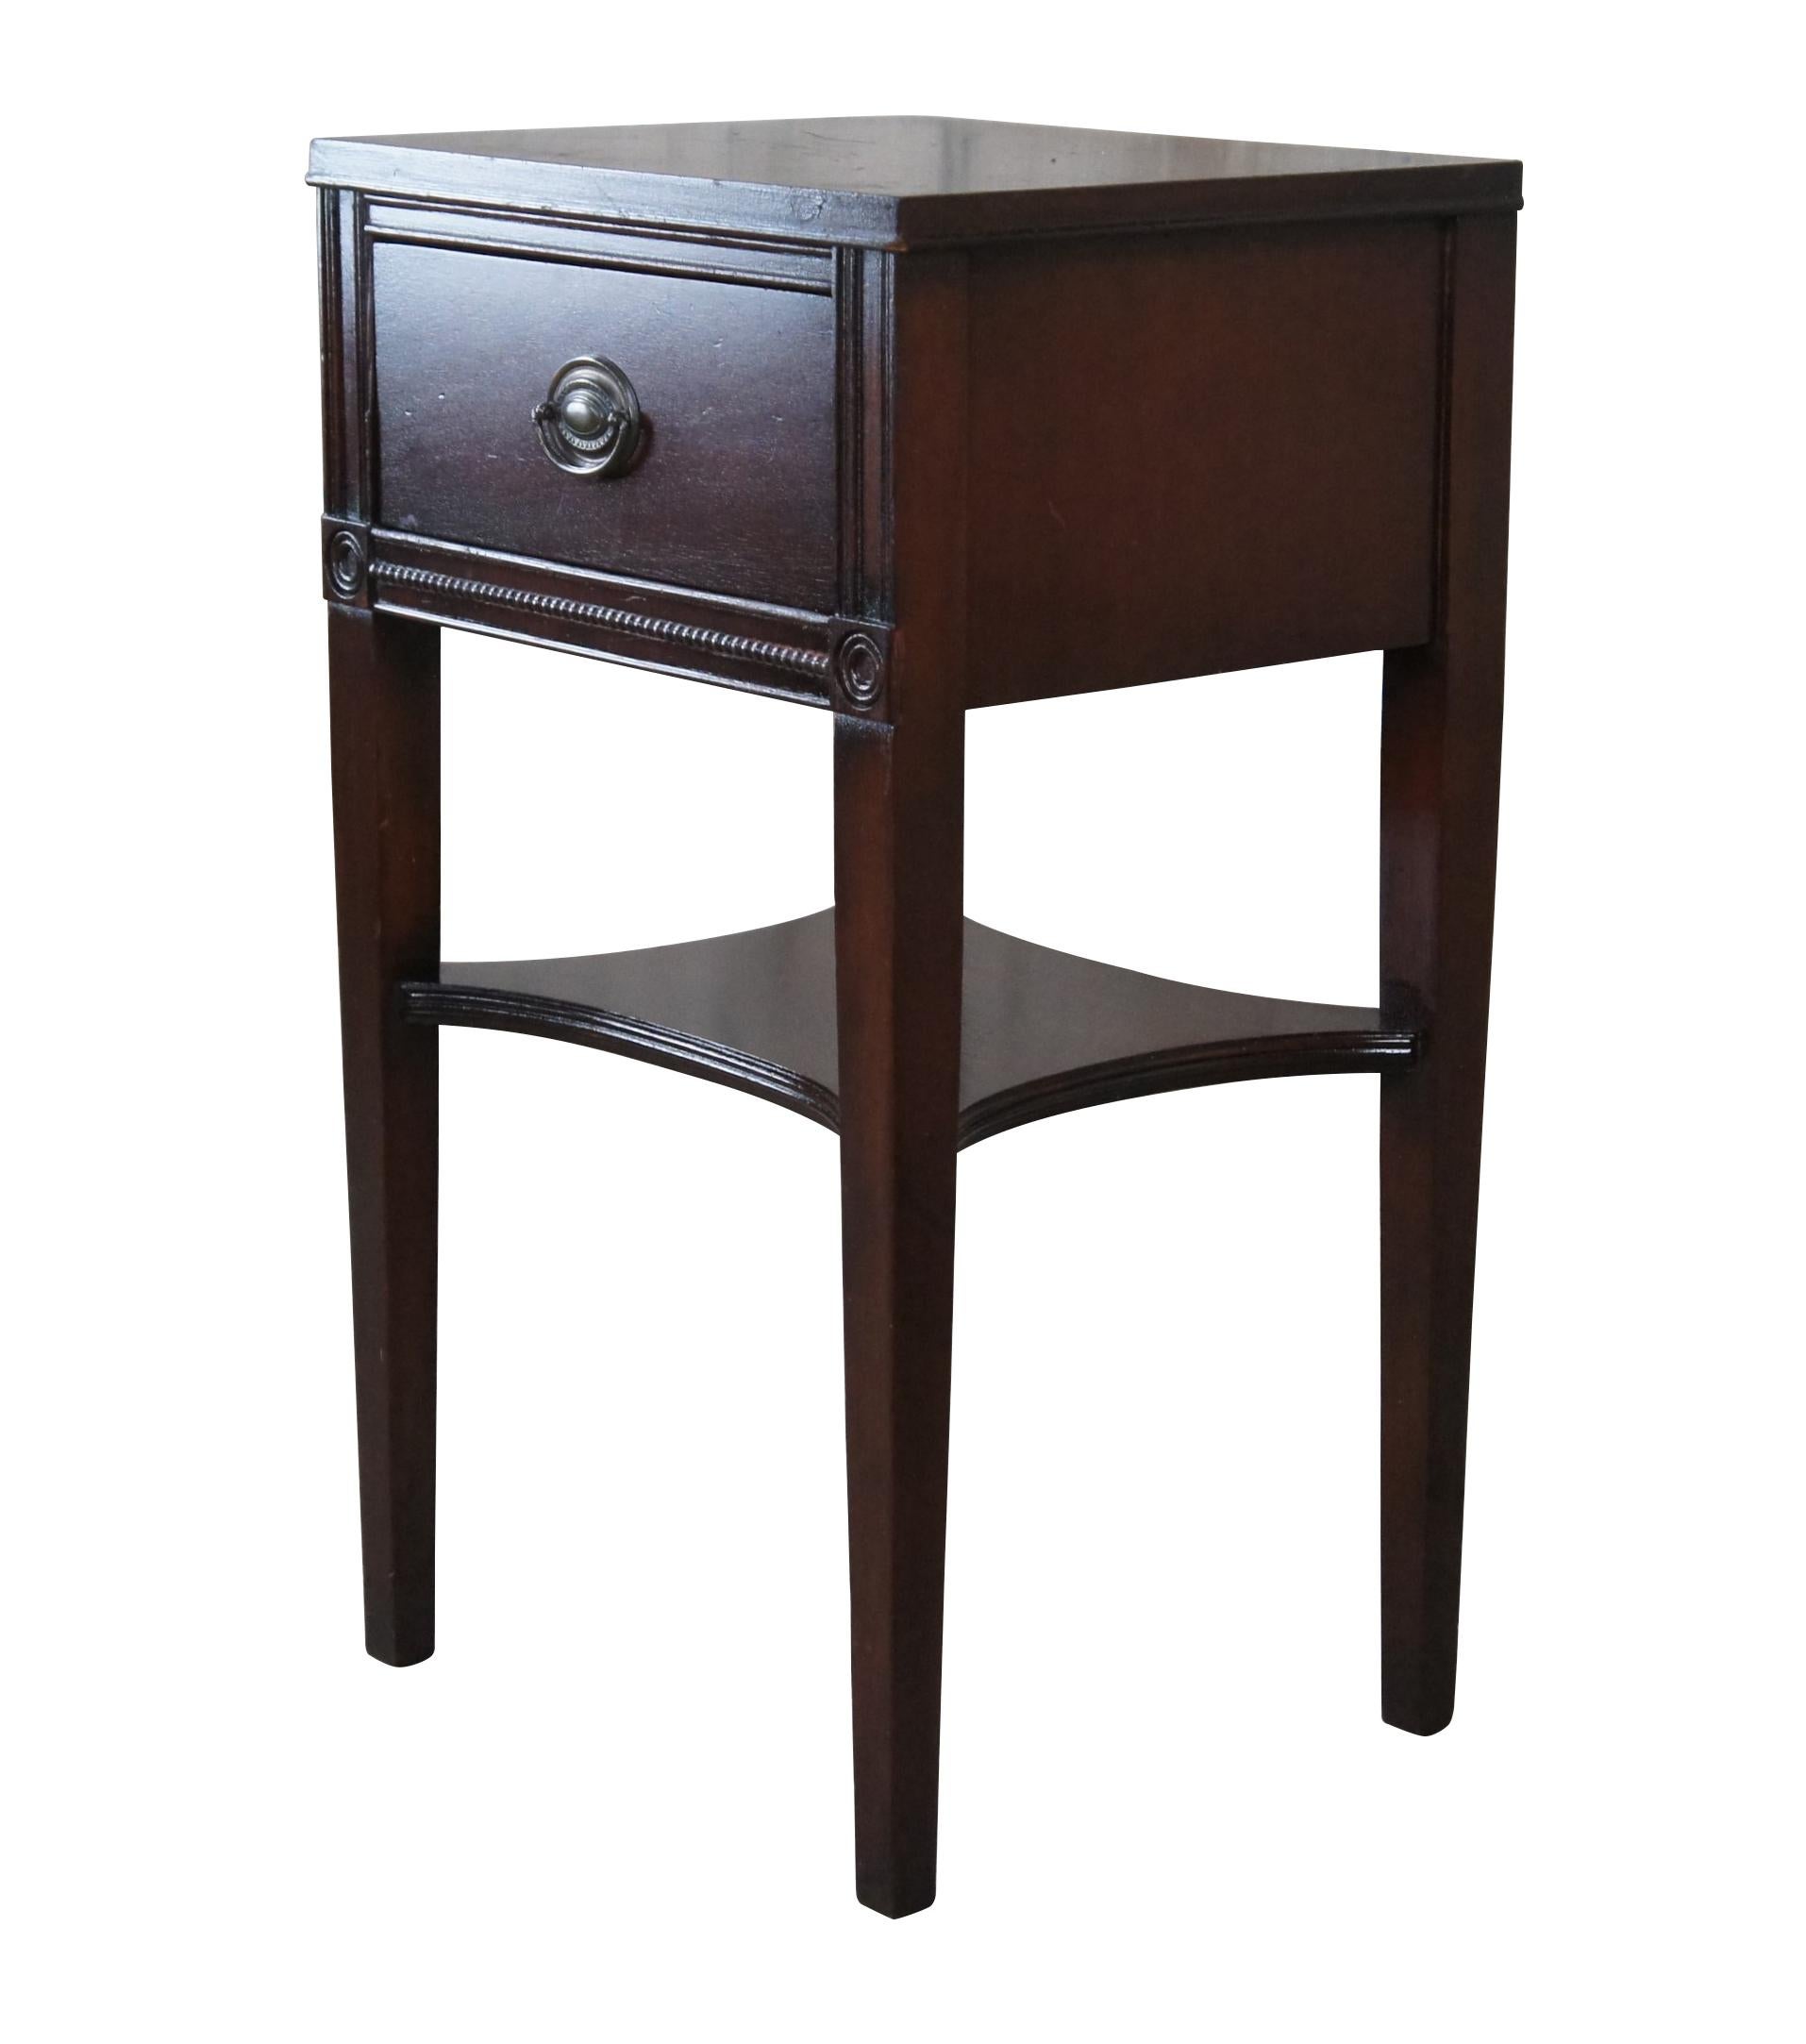 Sheraton style bedside table, circa mid 20th century.  Made from mahogany with one dovetailed drawer, beaded trim and lower shelf between square tapered legs.  

Dimensions:
16